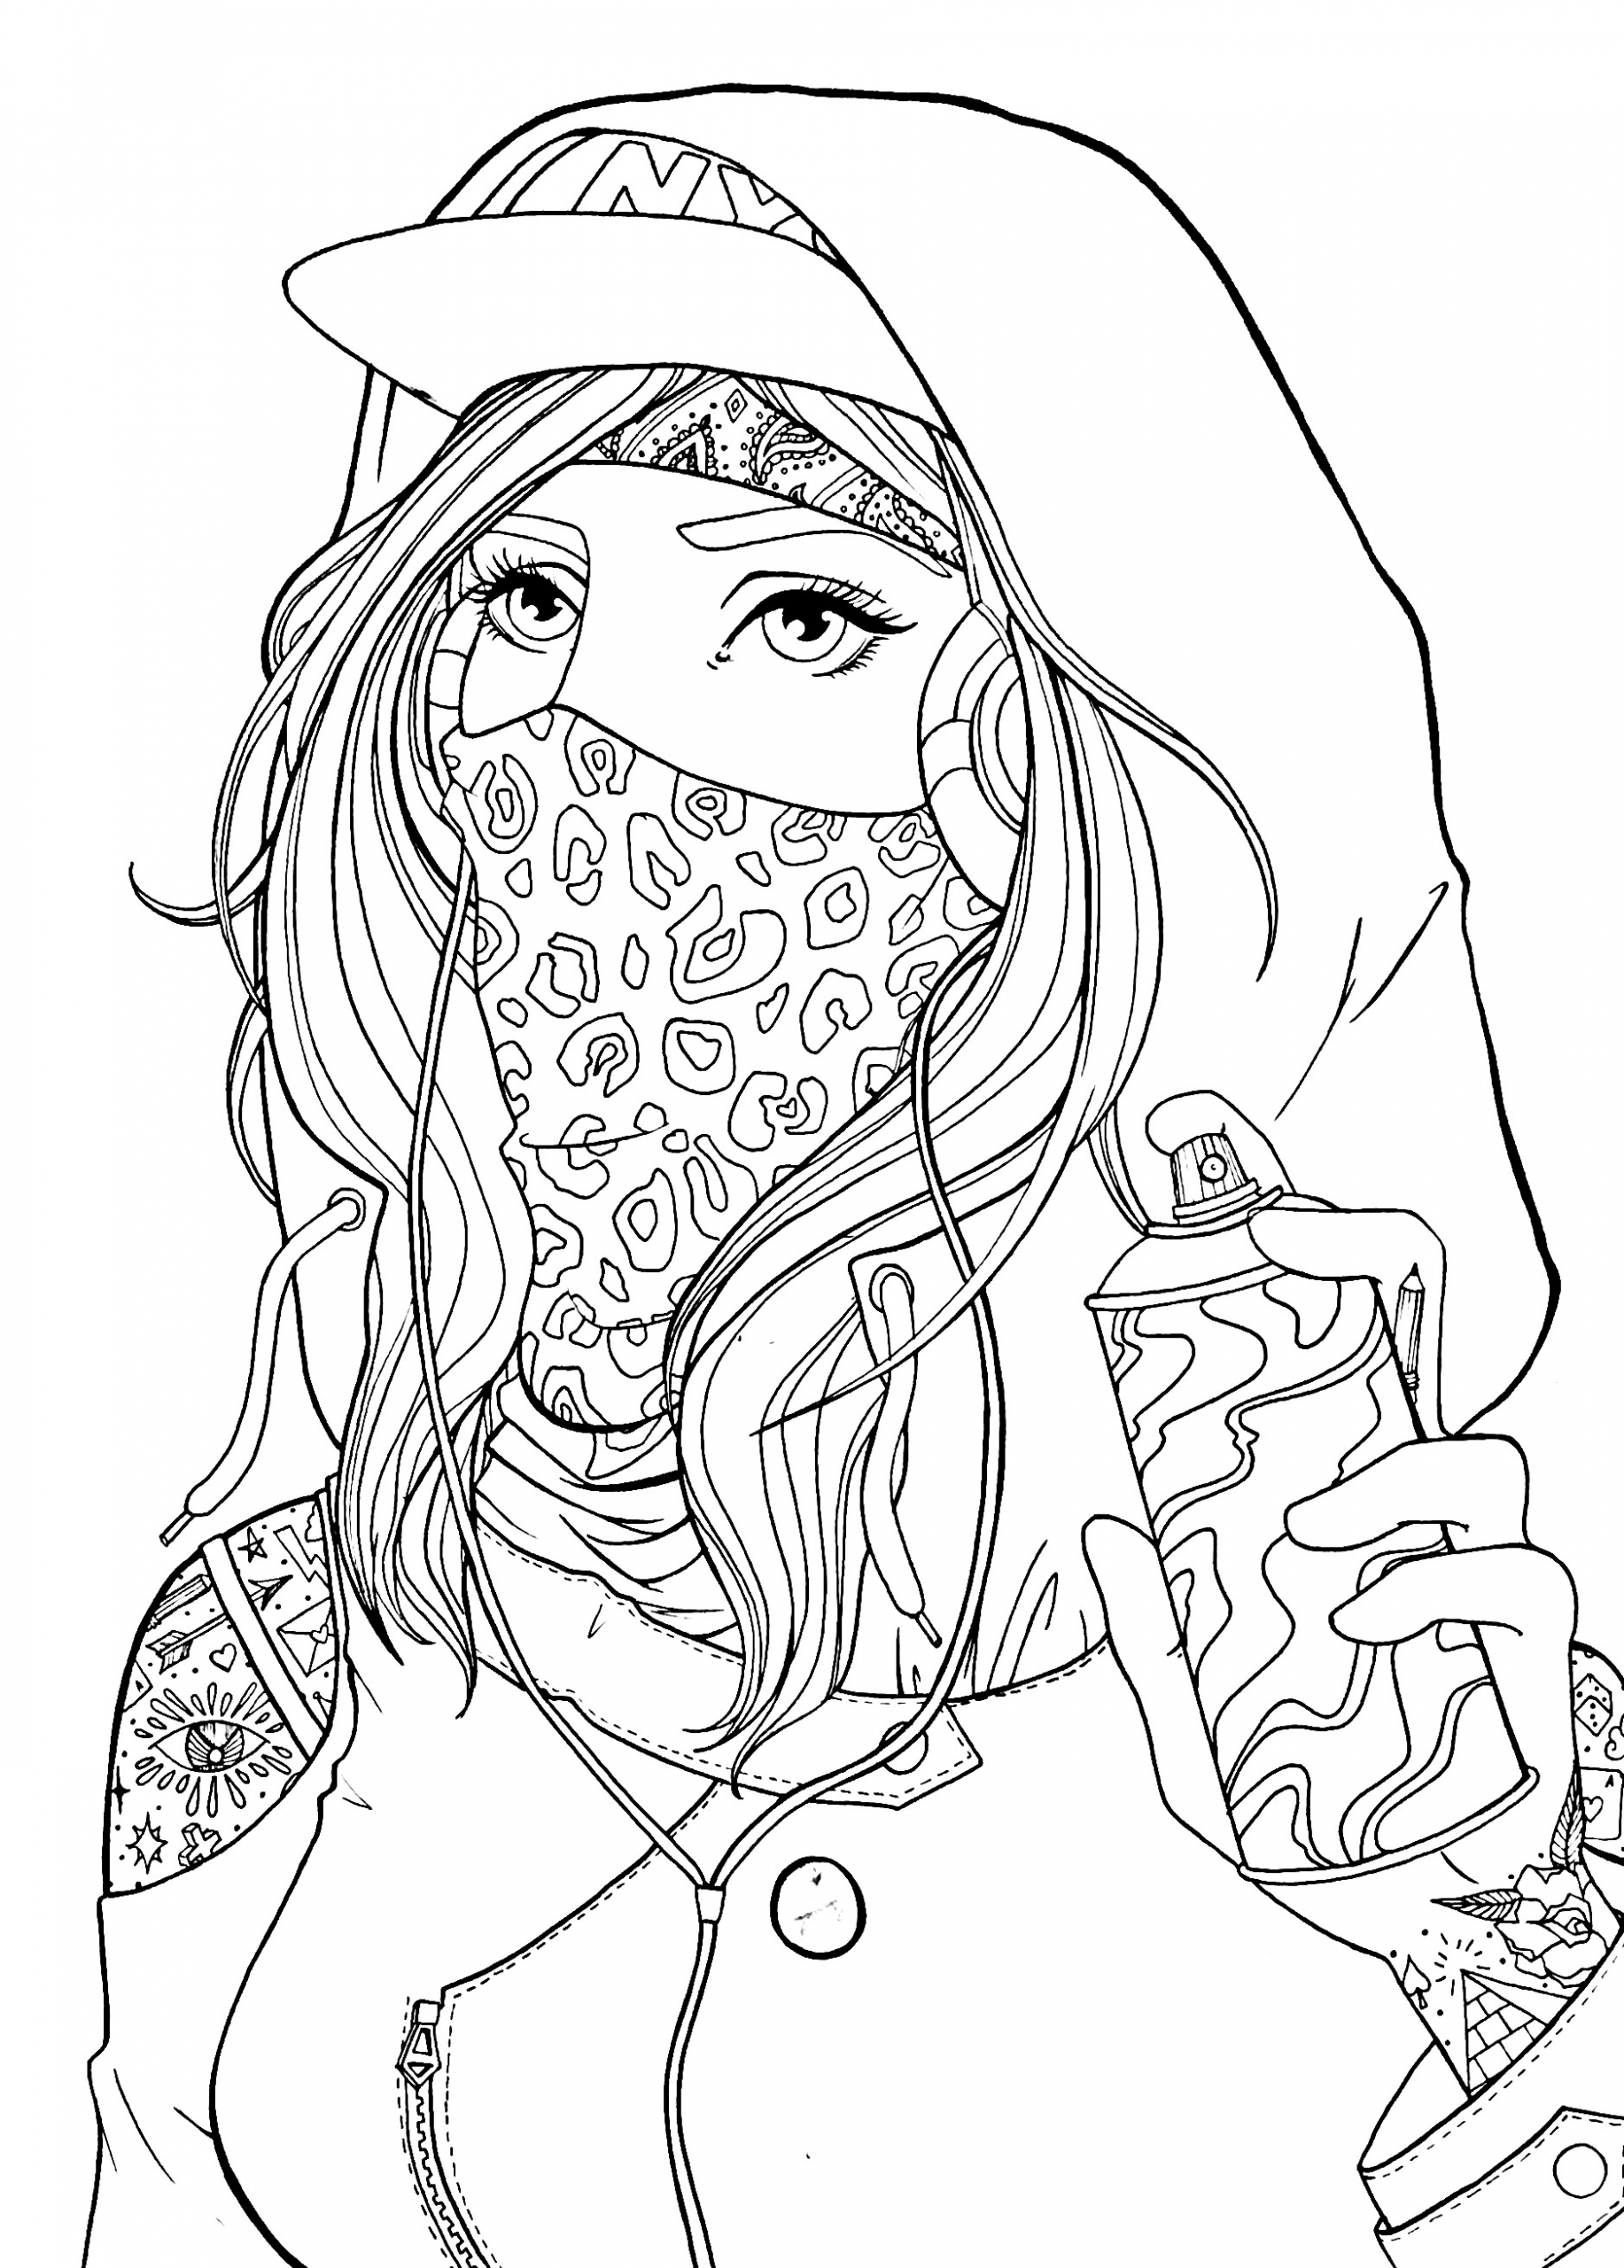 Coloring Pages For Adult Girls
 Graffiti girl drawing lineart